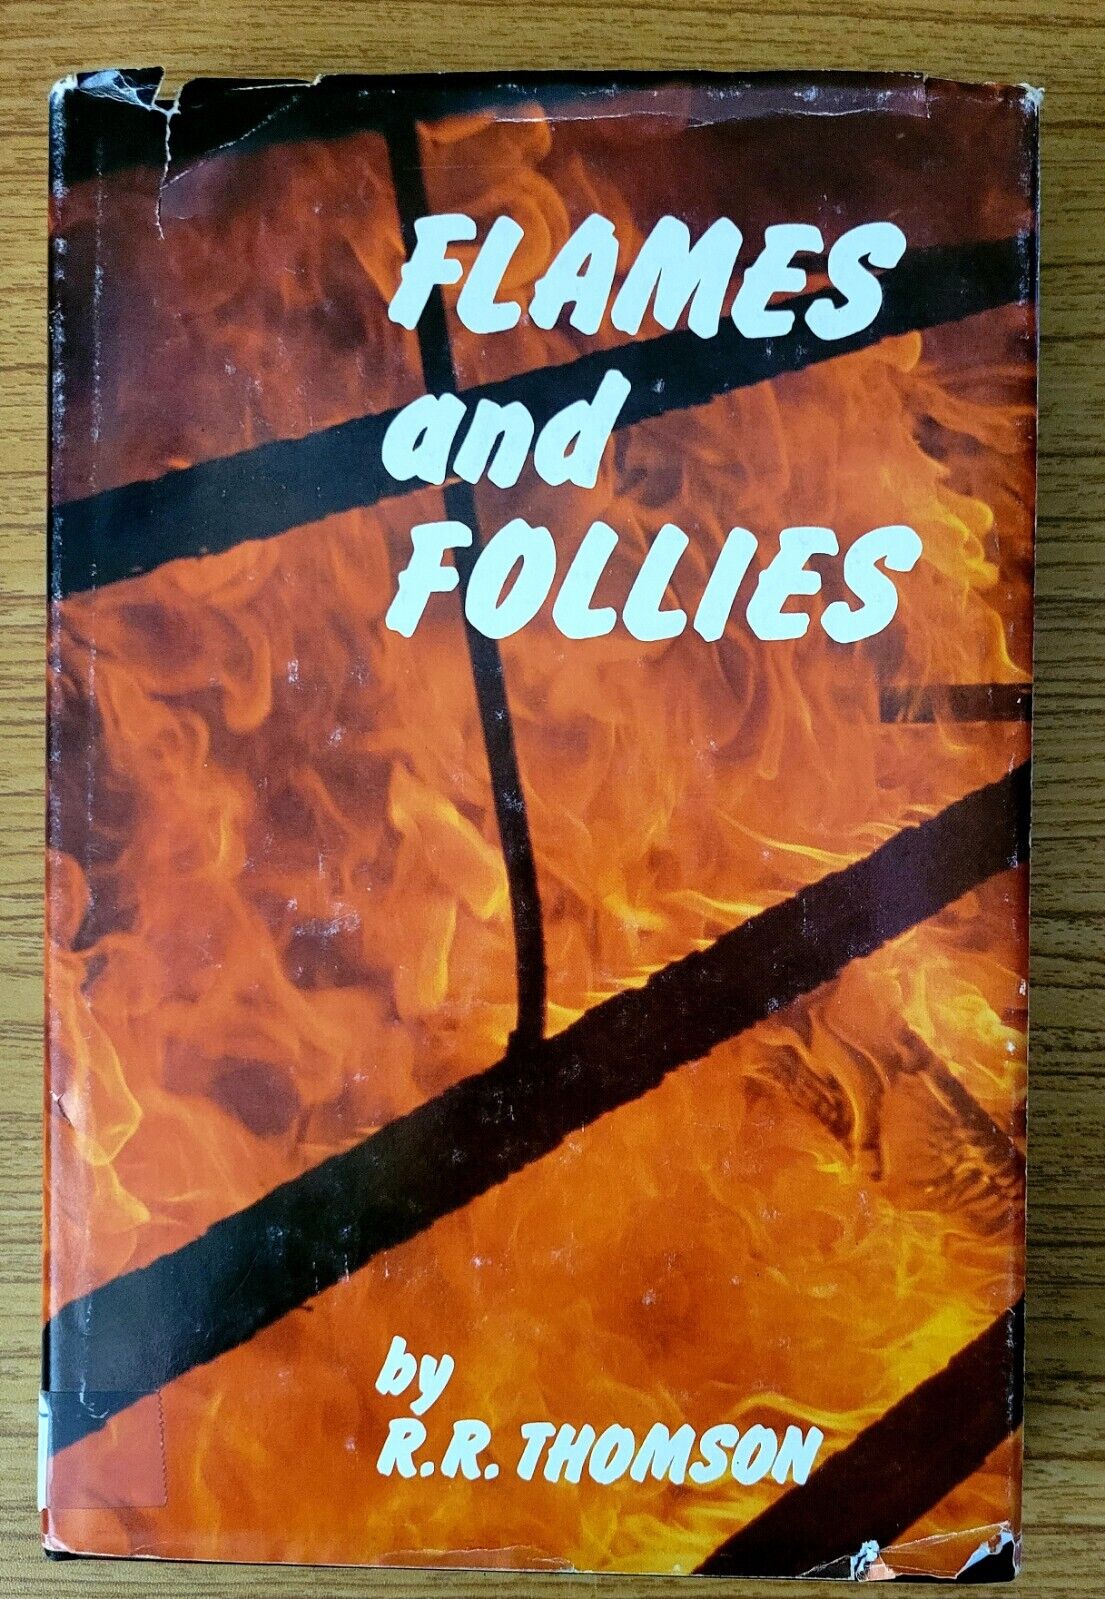 Flames and Follies, by R. R. Thompson 1986 very rare, 